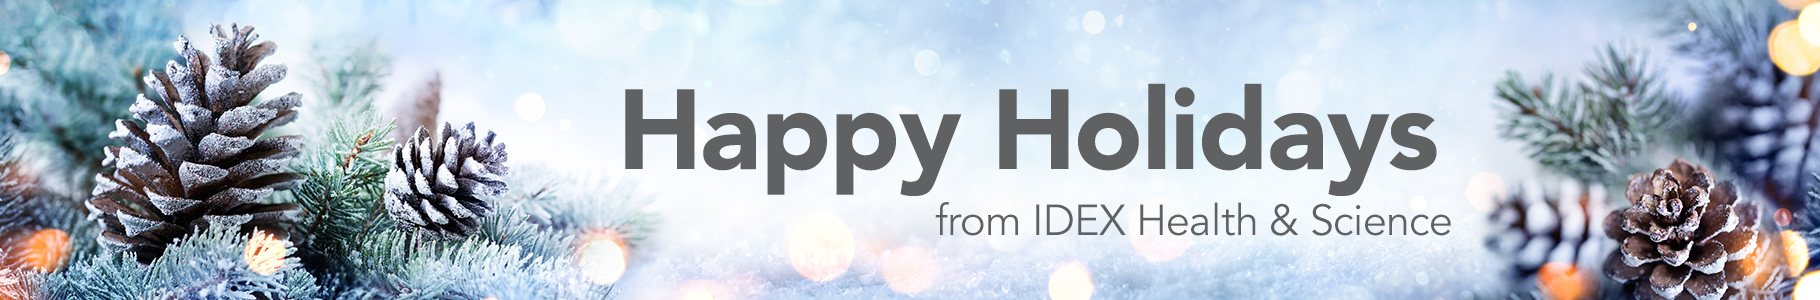 Happy Holidays from IDEX Health & Science